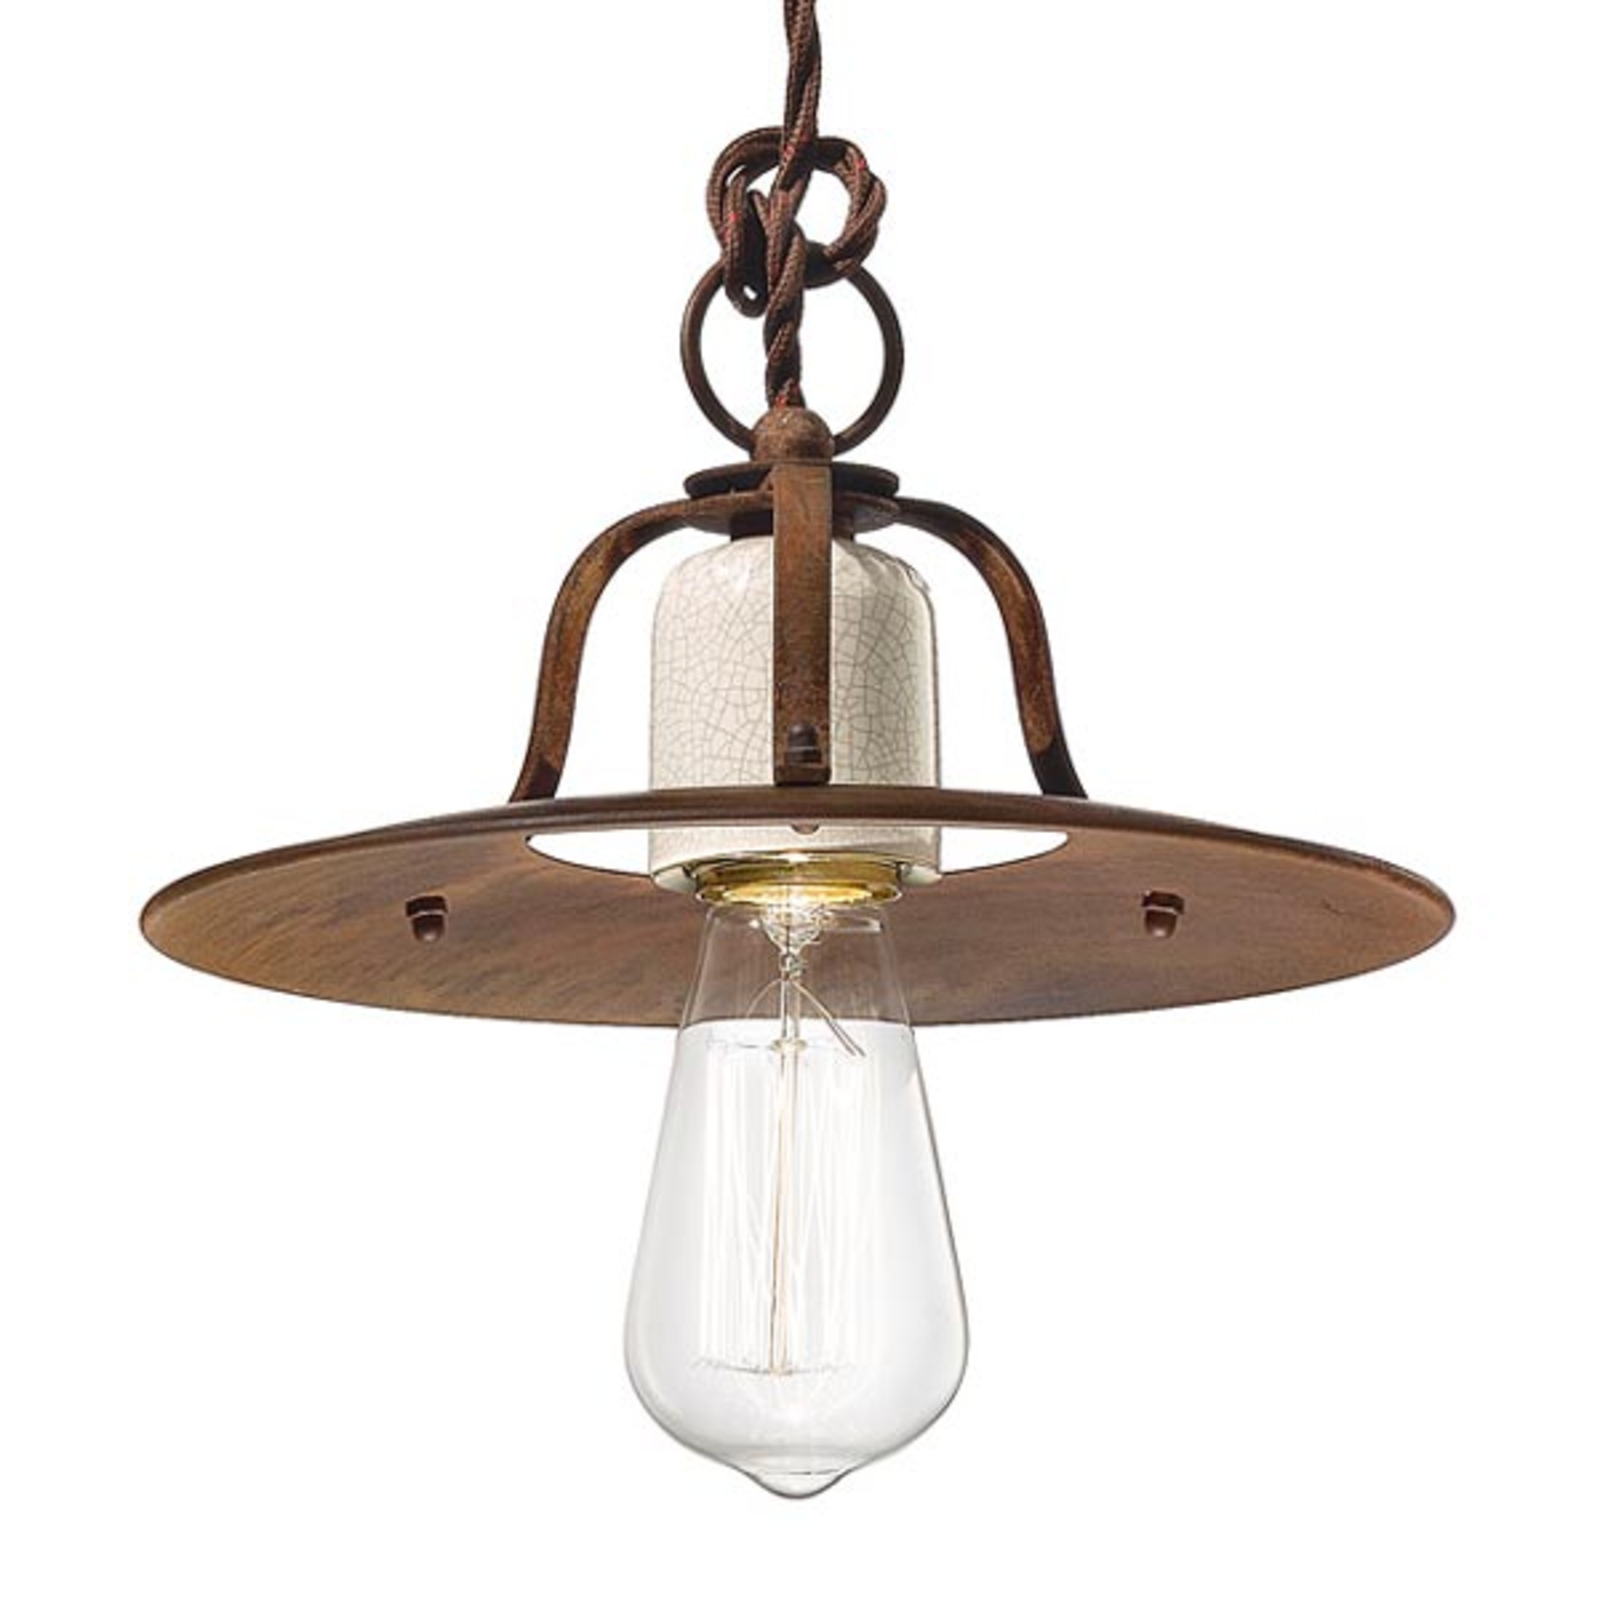 Small Riccardo pendant light with a rustic look